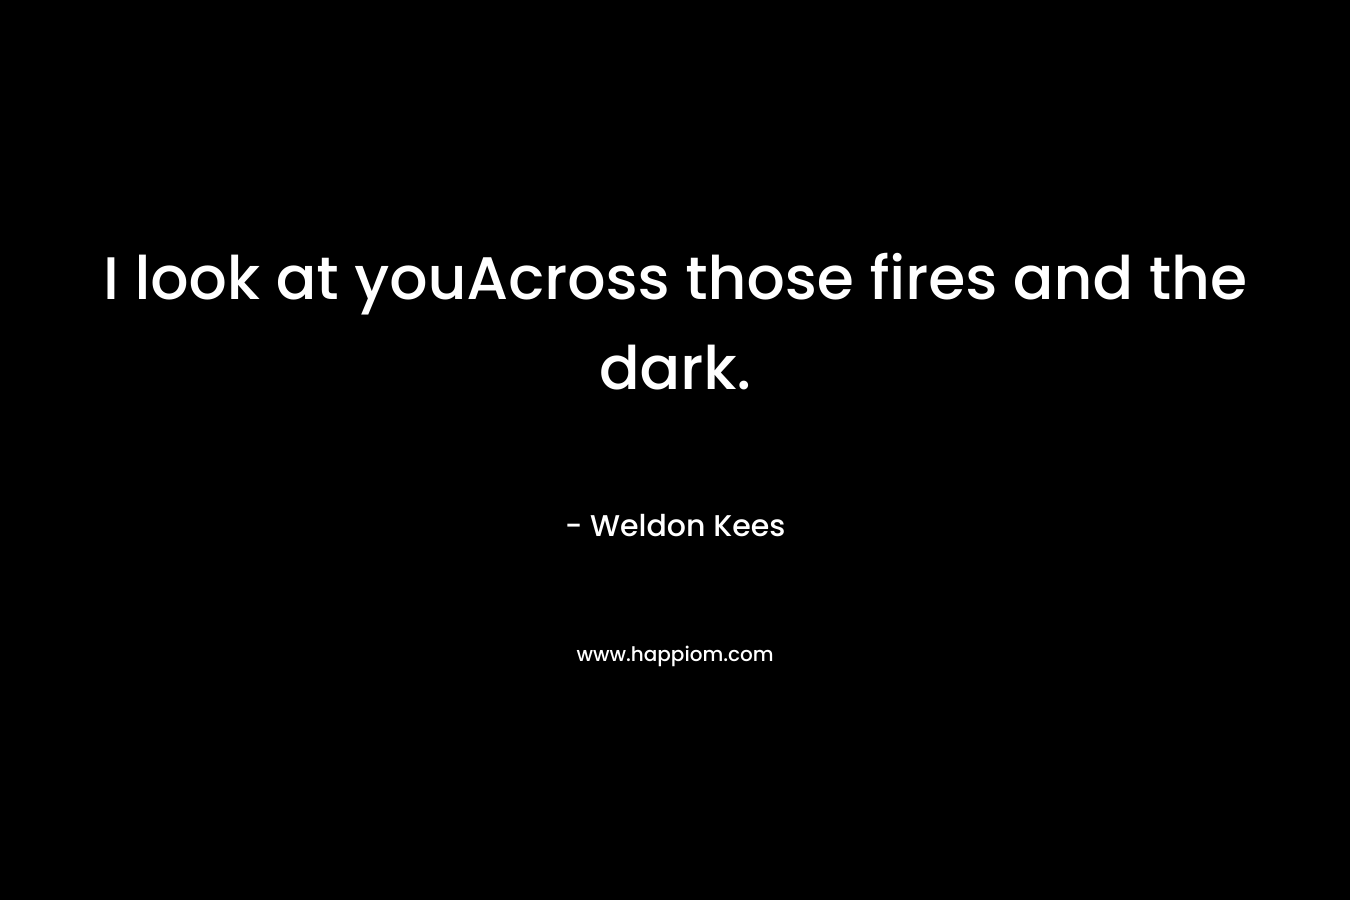 I look at youAcross those fires and the dark.